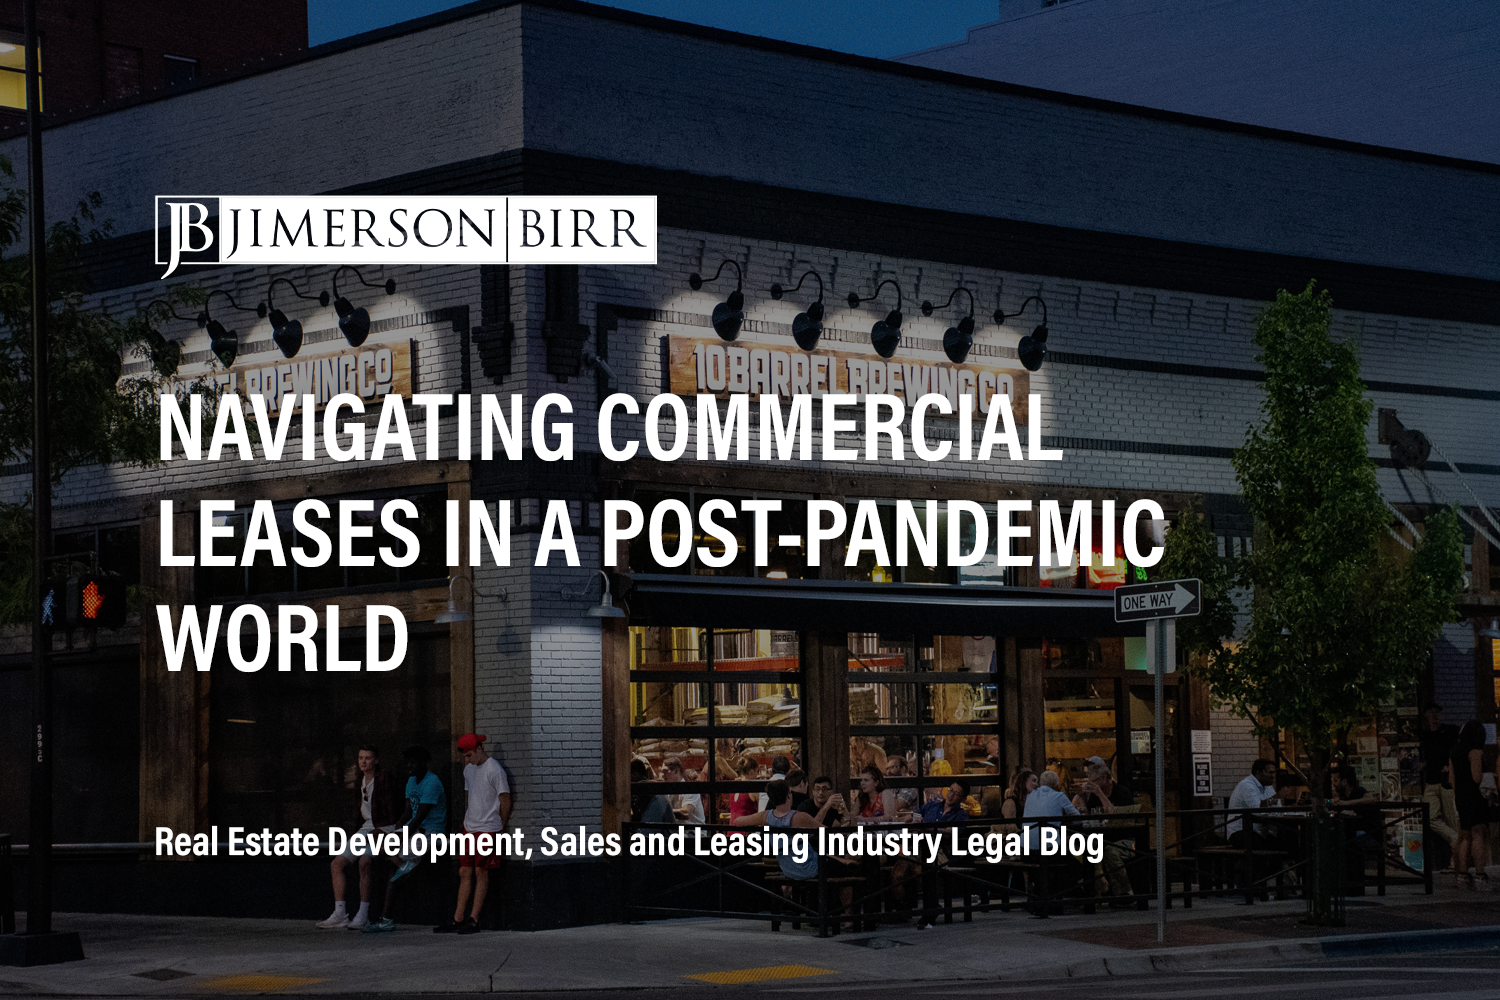 Navigating Commercial Leases in a Post-Pandemic World